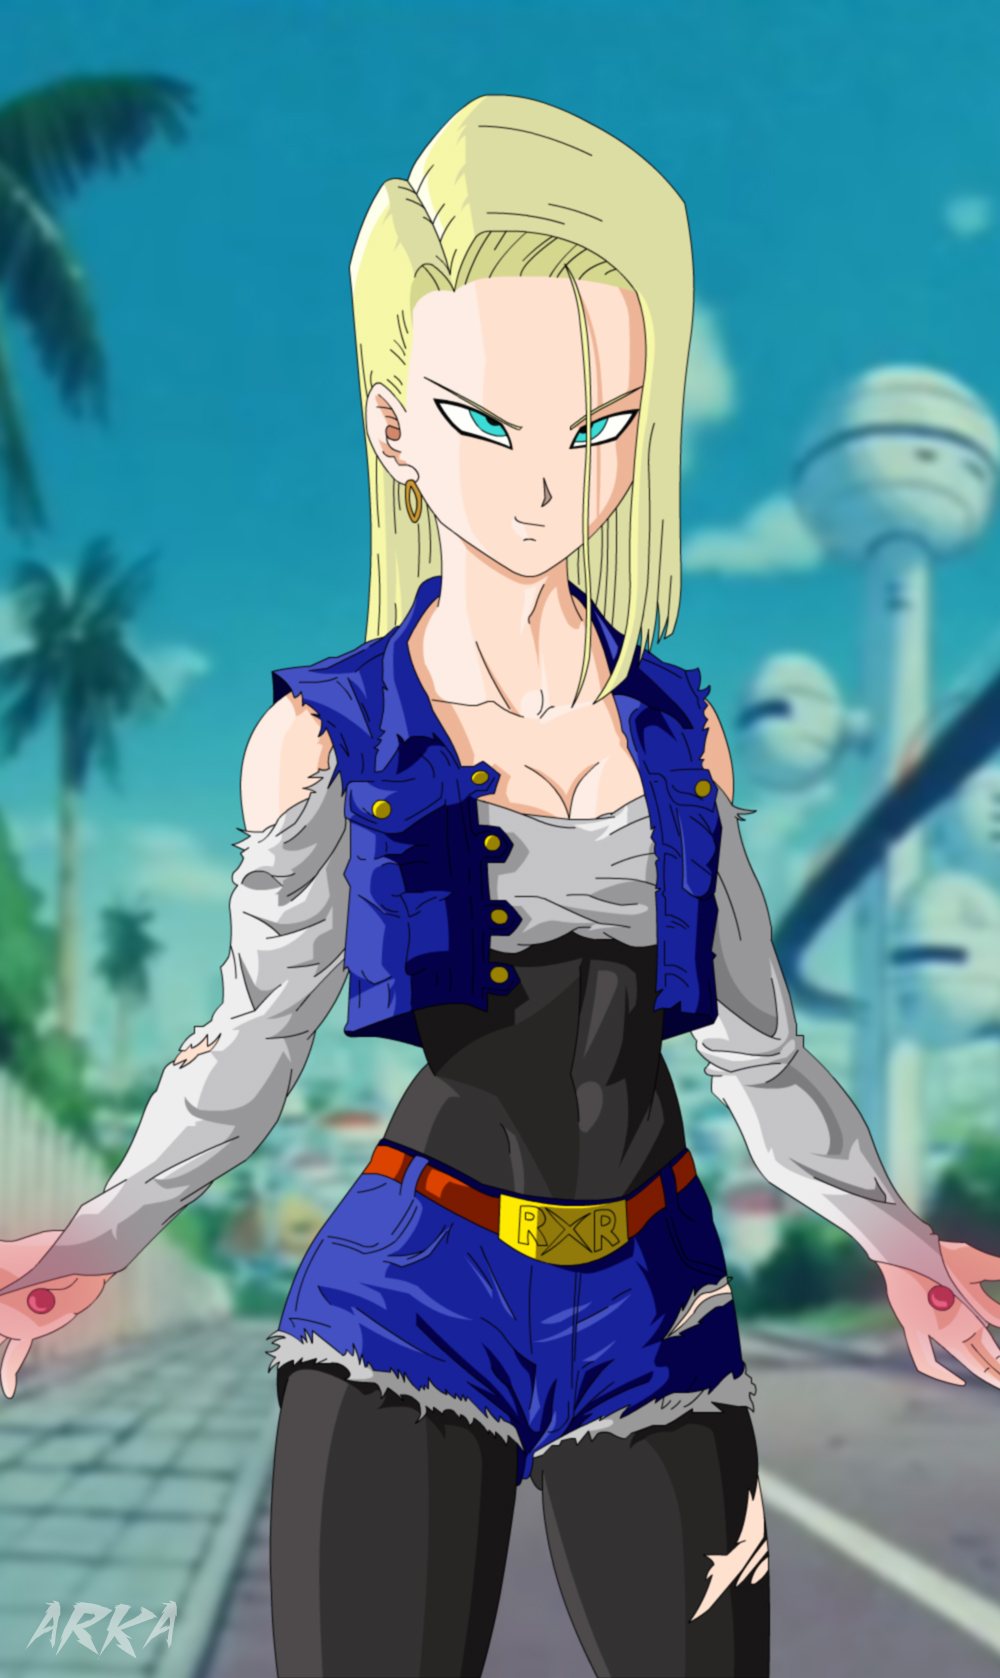 Super Androide 18 - Super Android 18 by CFFC2010 on DeviantArt